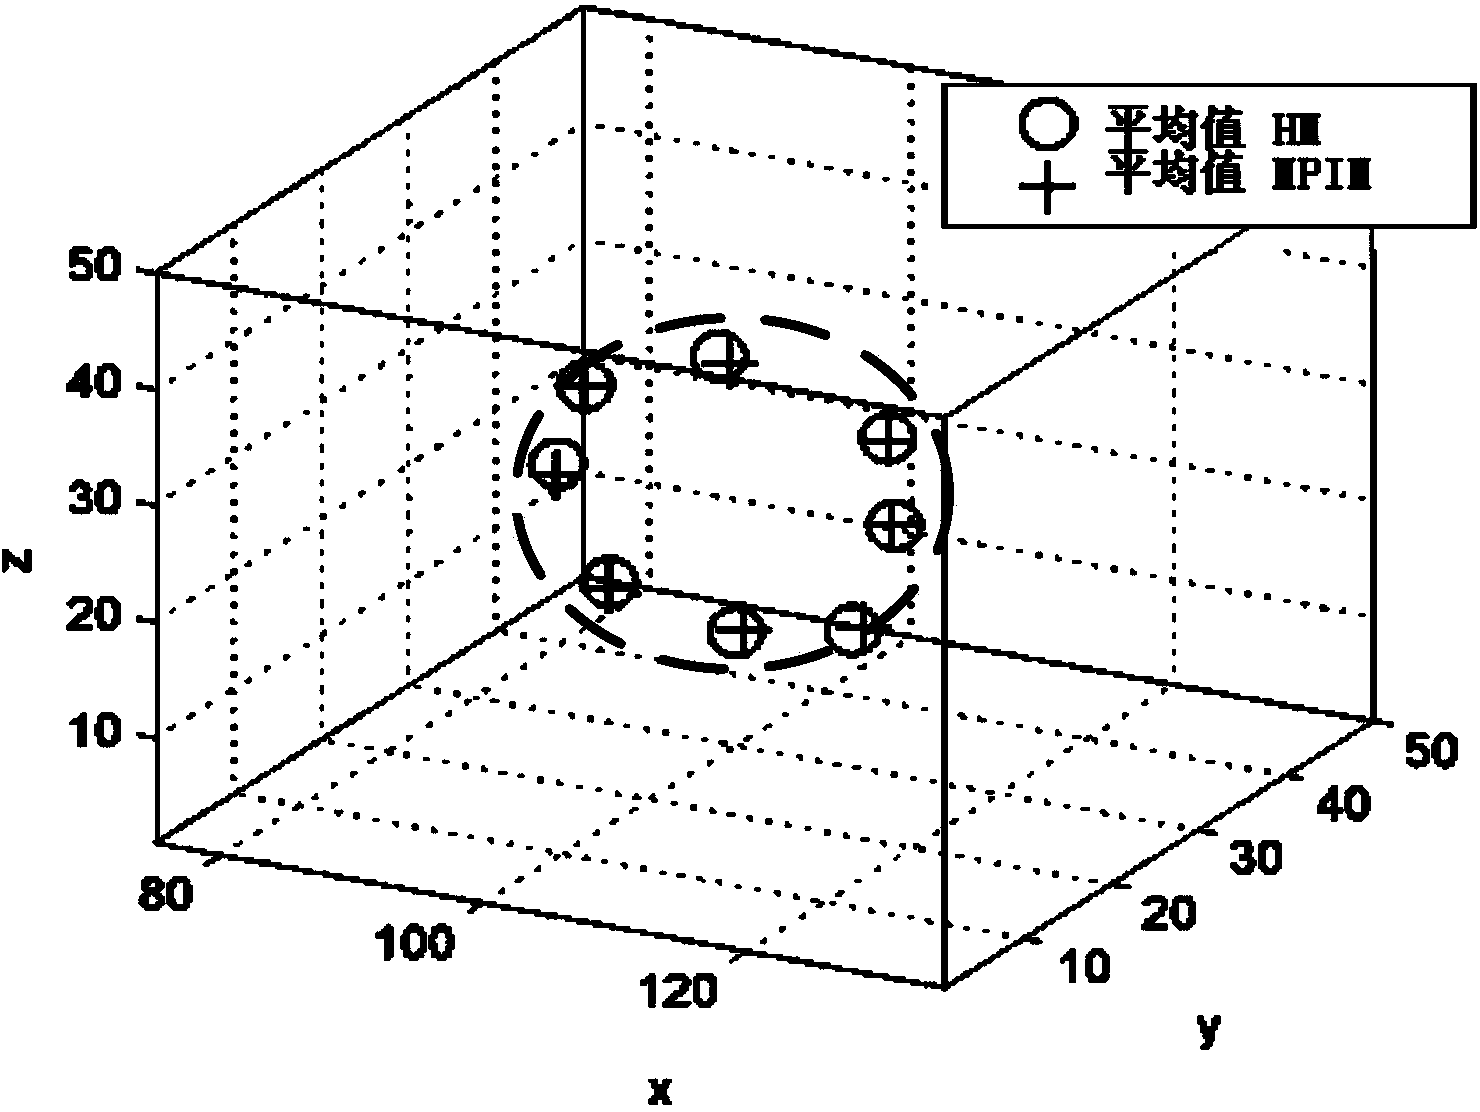 Micro-earthquake positioning method and device